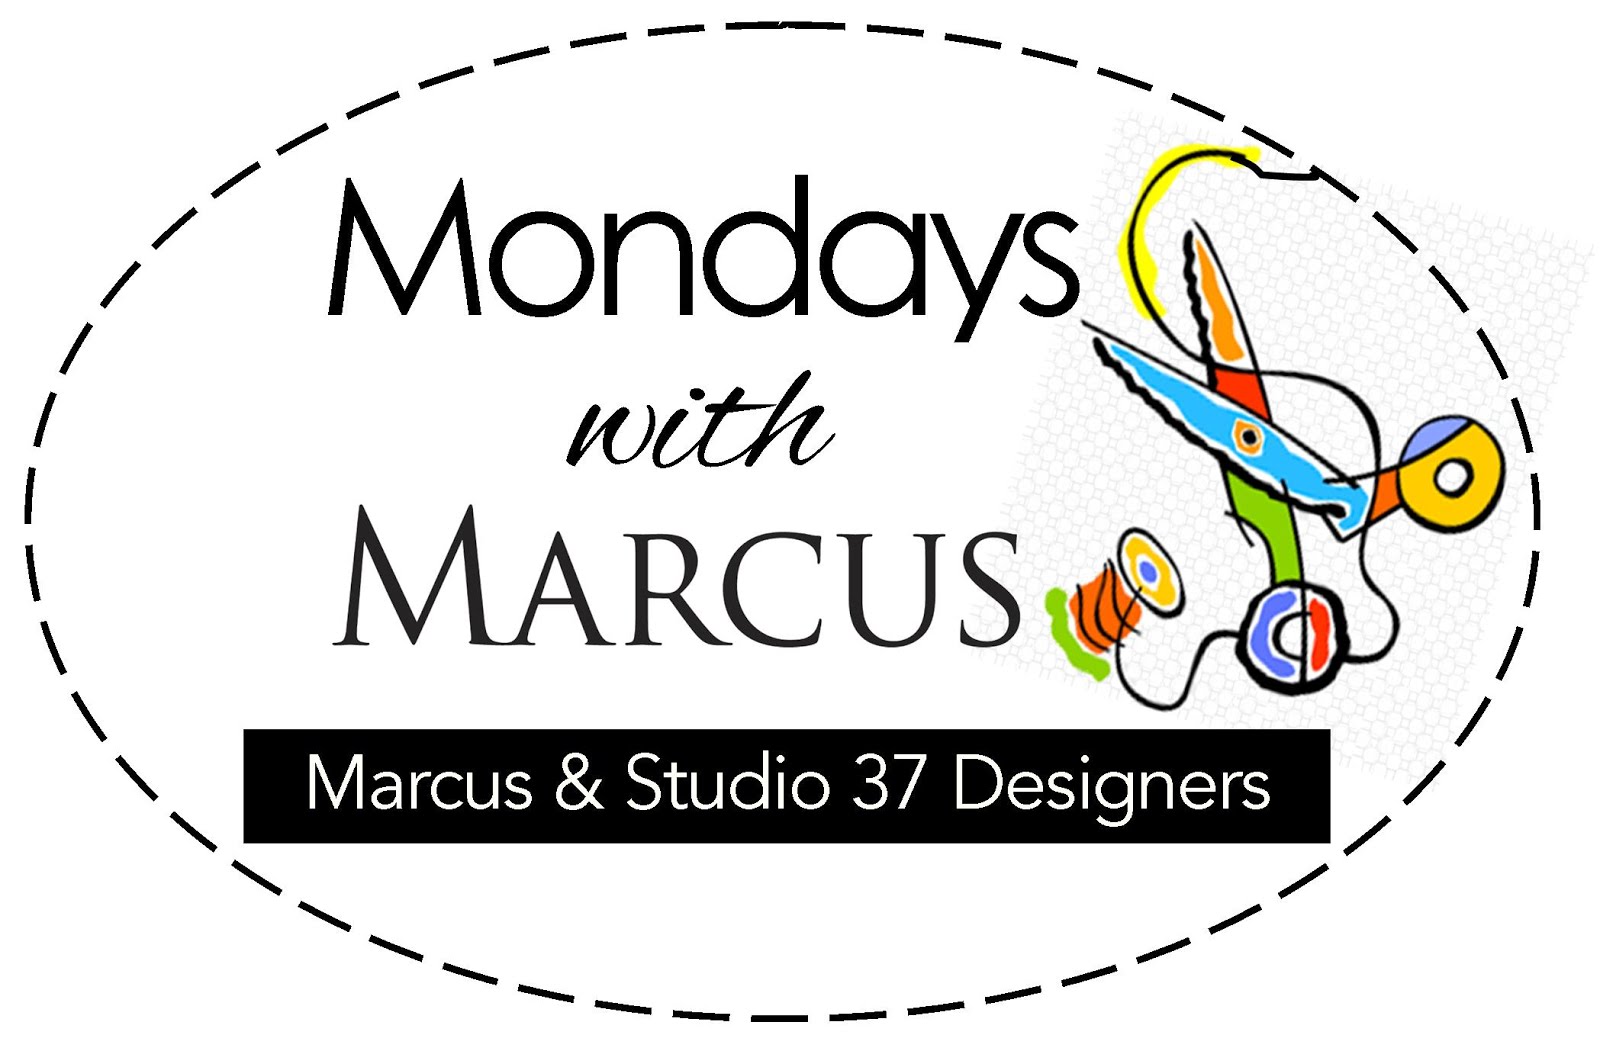 Monday's With Marcus